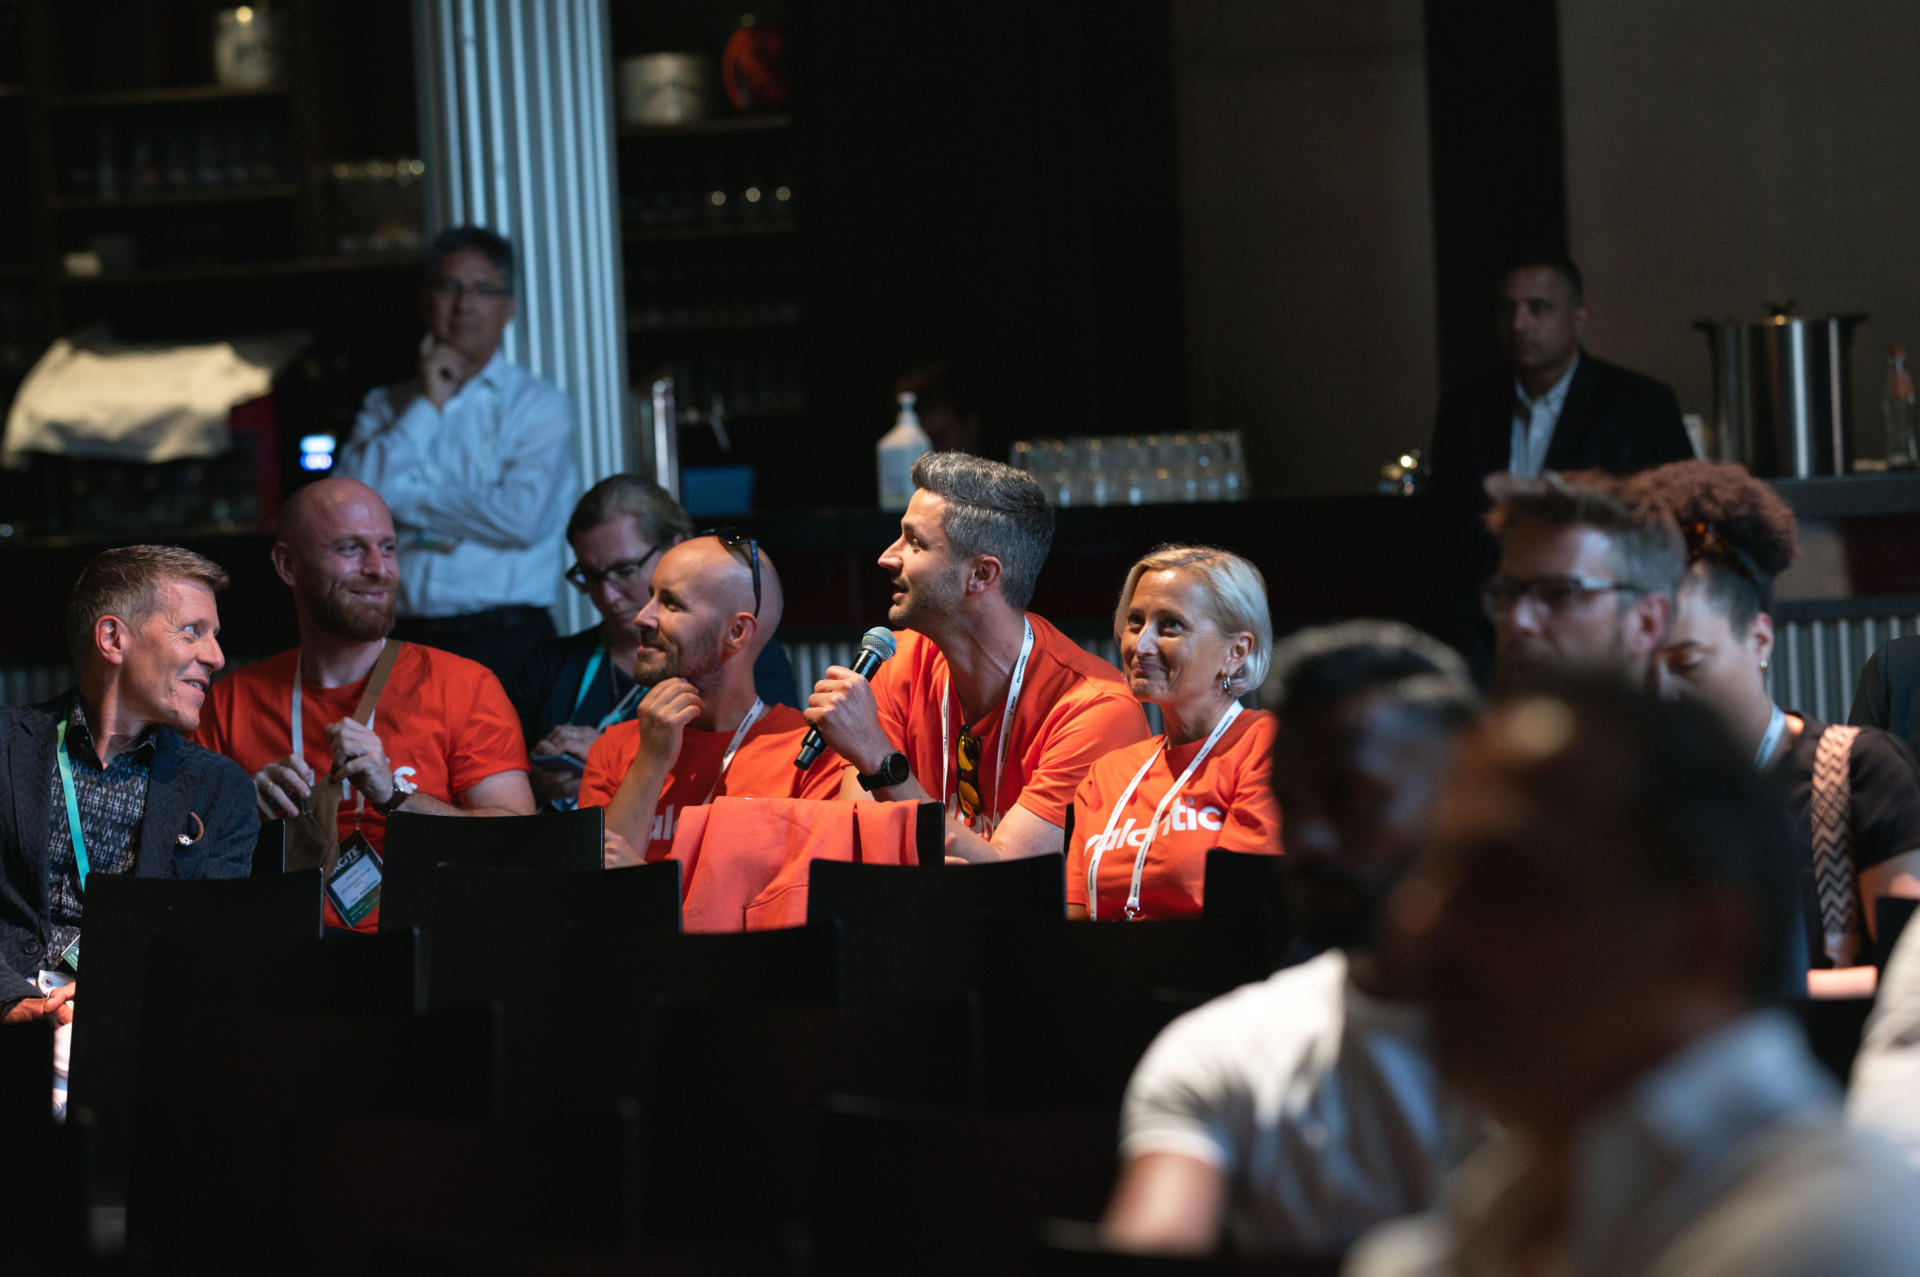 A group of people, some wearing orange shirts, are seated in a conference room at Spryker EXCITE 2024. One person is speaking into a microphone. Others are looking towards the speaker, while some are engaged in conversation.